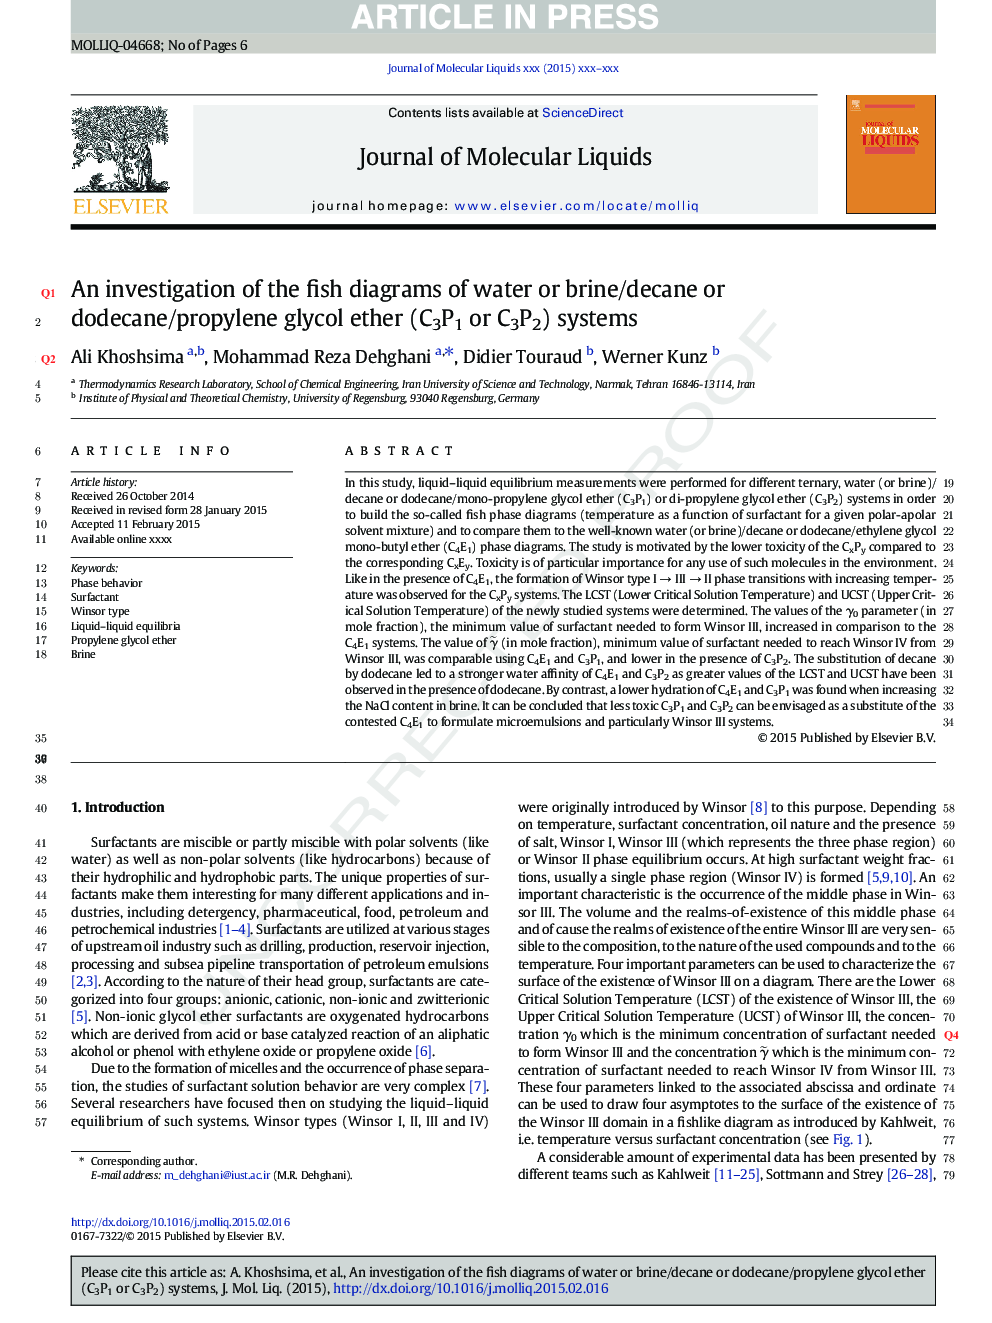 An investigation of the fish diagrams of water or brine/decane or dodecane/propylene glycol ether (C3P1 or C3P2) systems